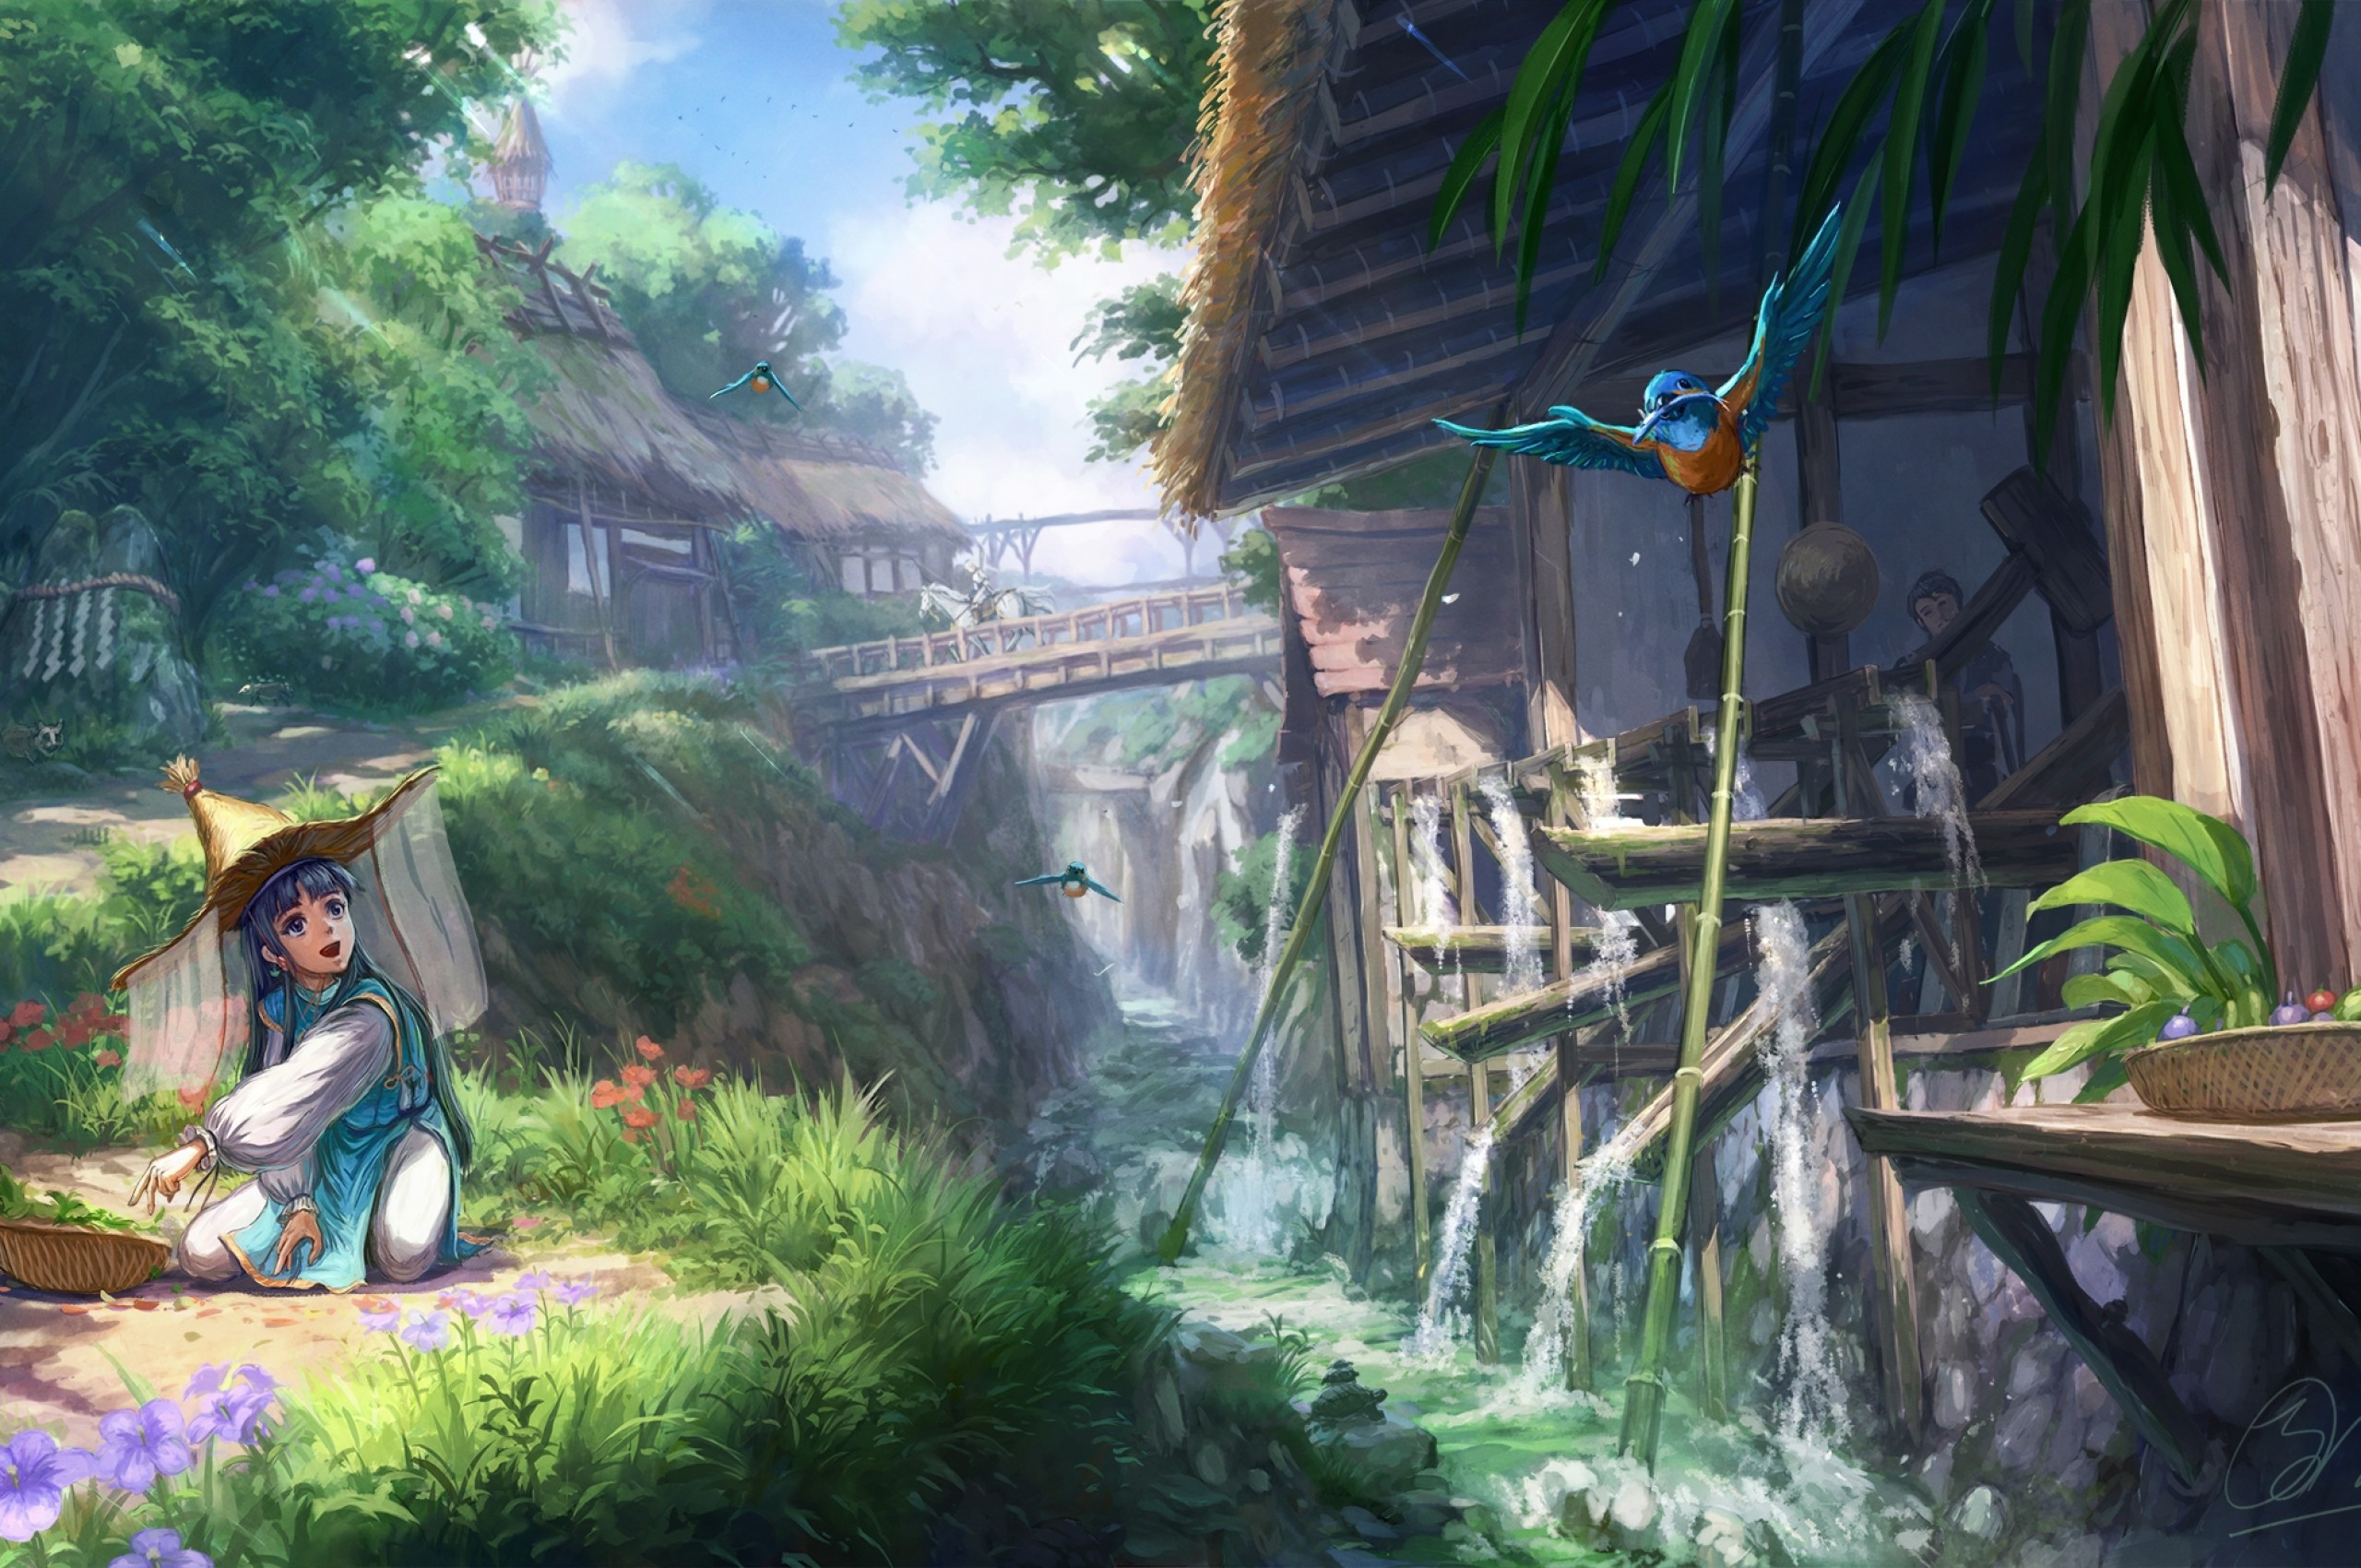 Download 2560x1700 Anime Village, Bridge, Water, Houses, People, Scenic, Calm Wallpaper for Chromebook Pixel